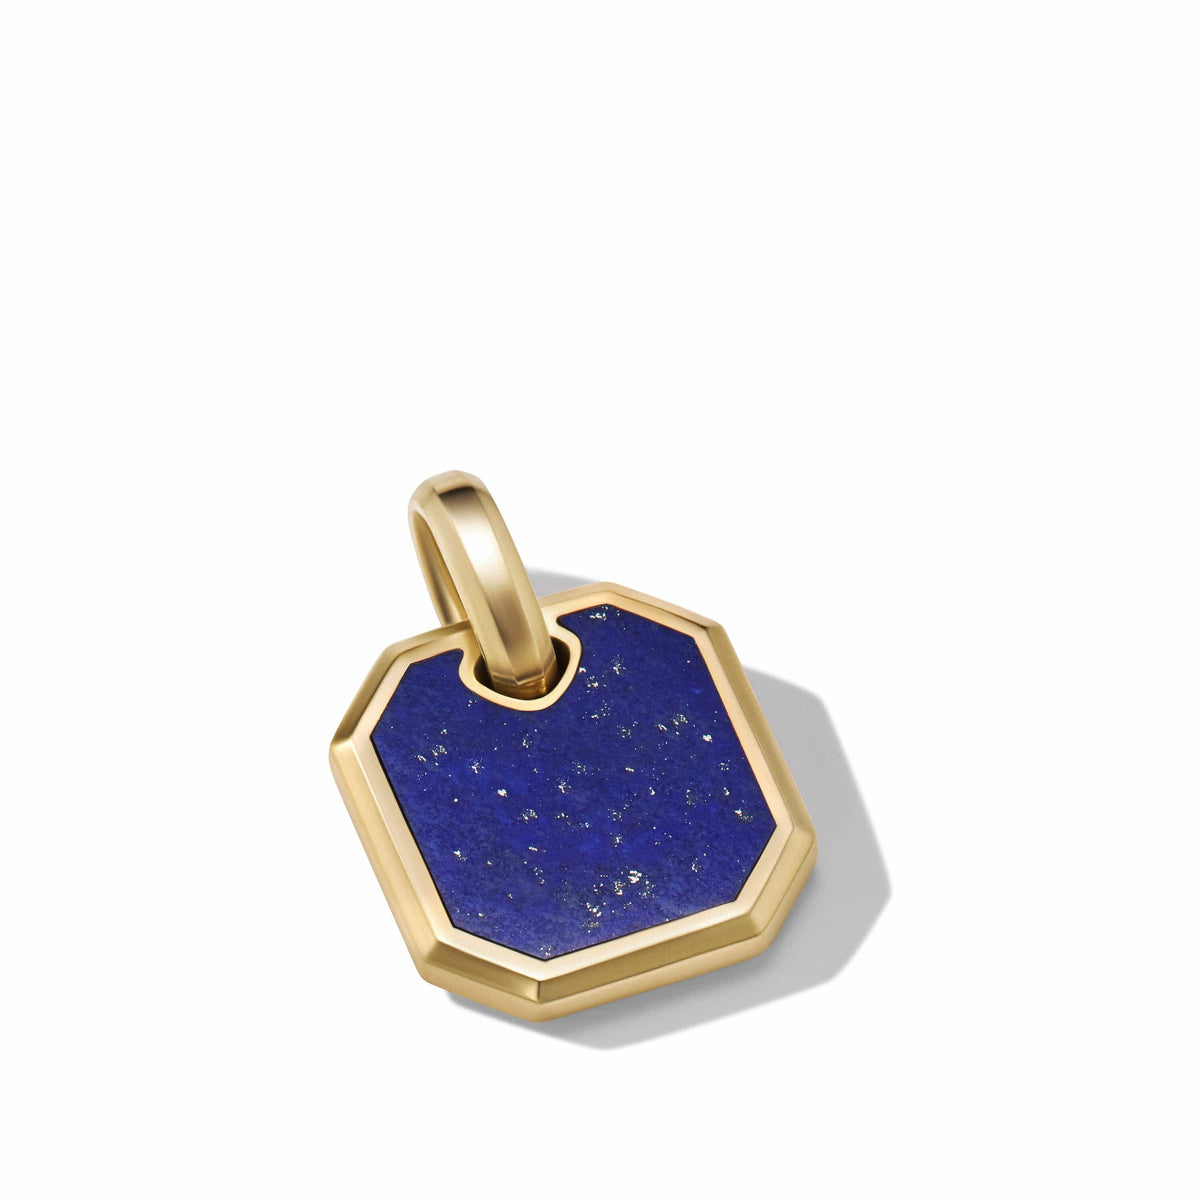 Roman Amulet in 18K Yellow Gold with Lapis